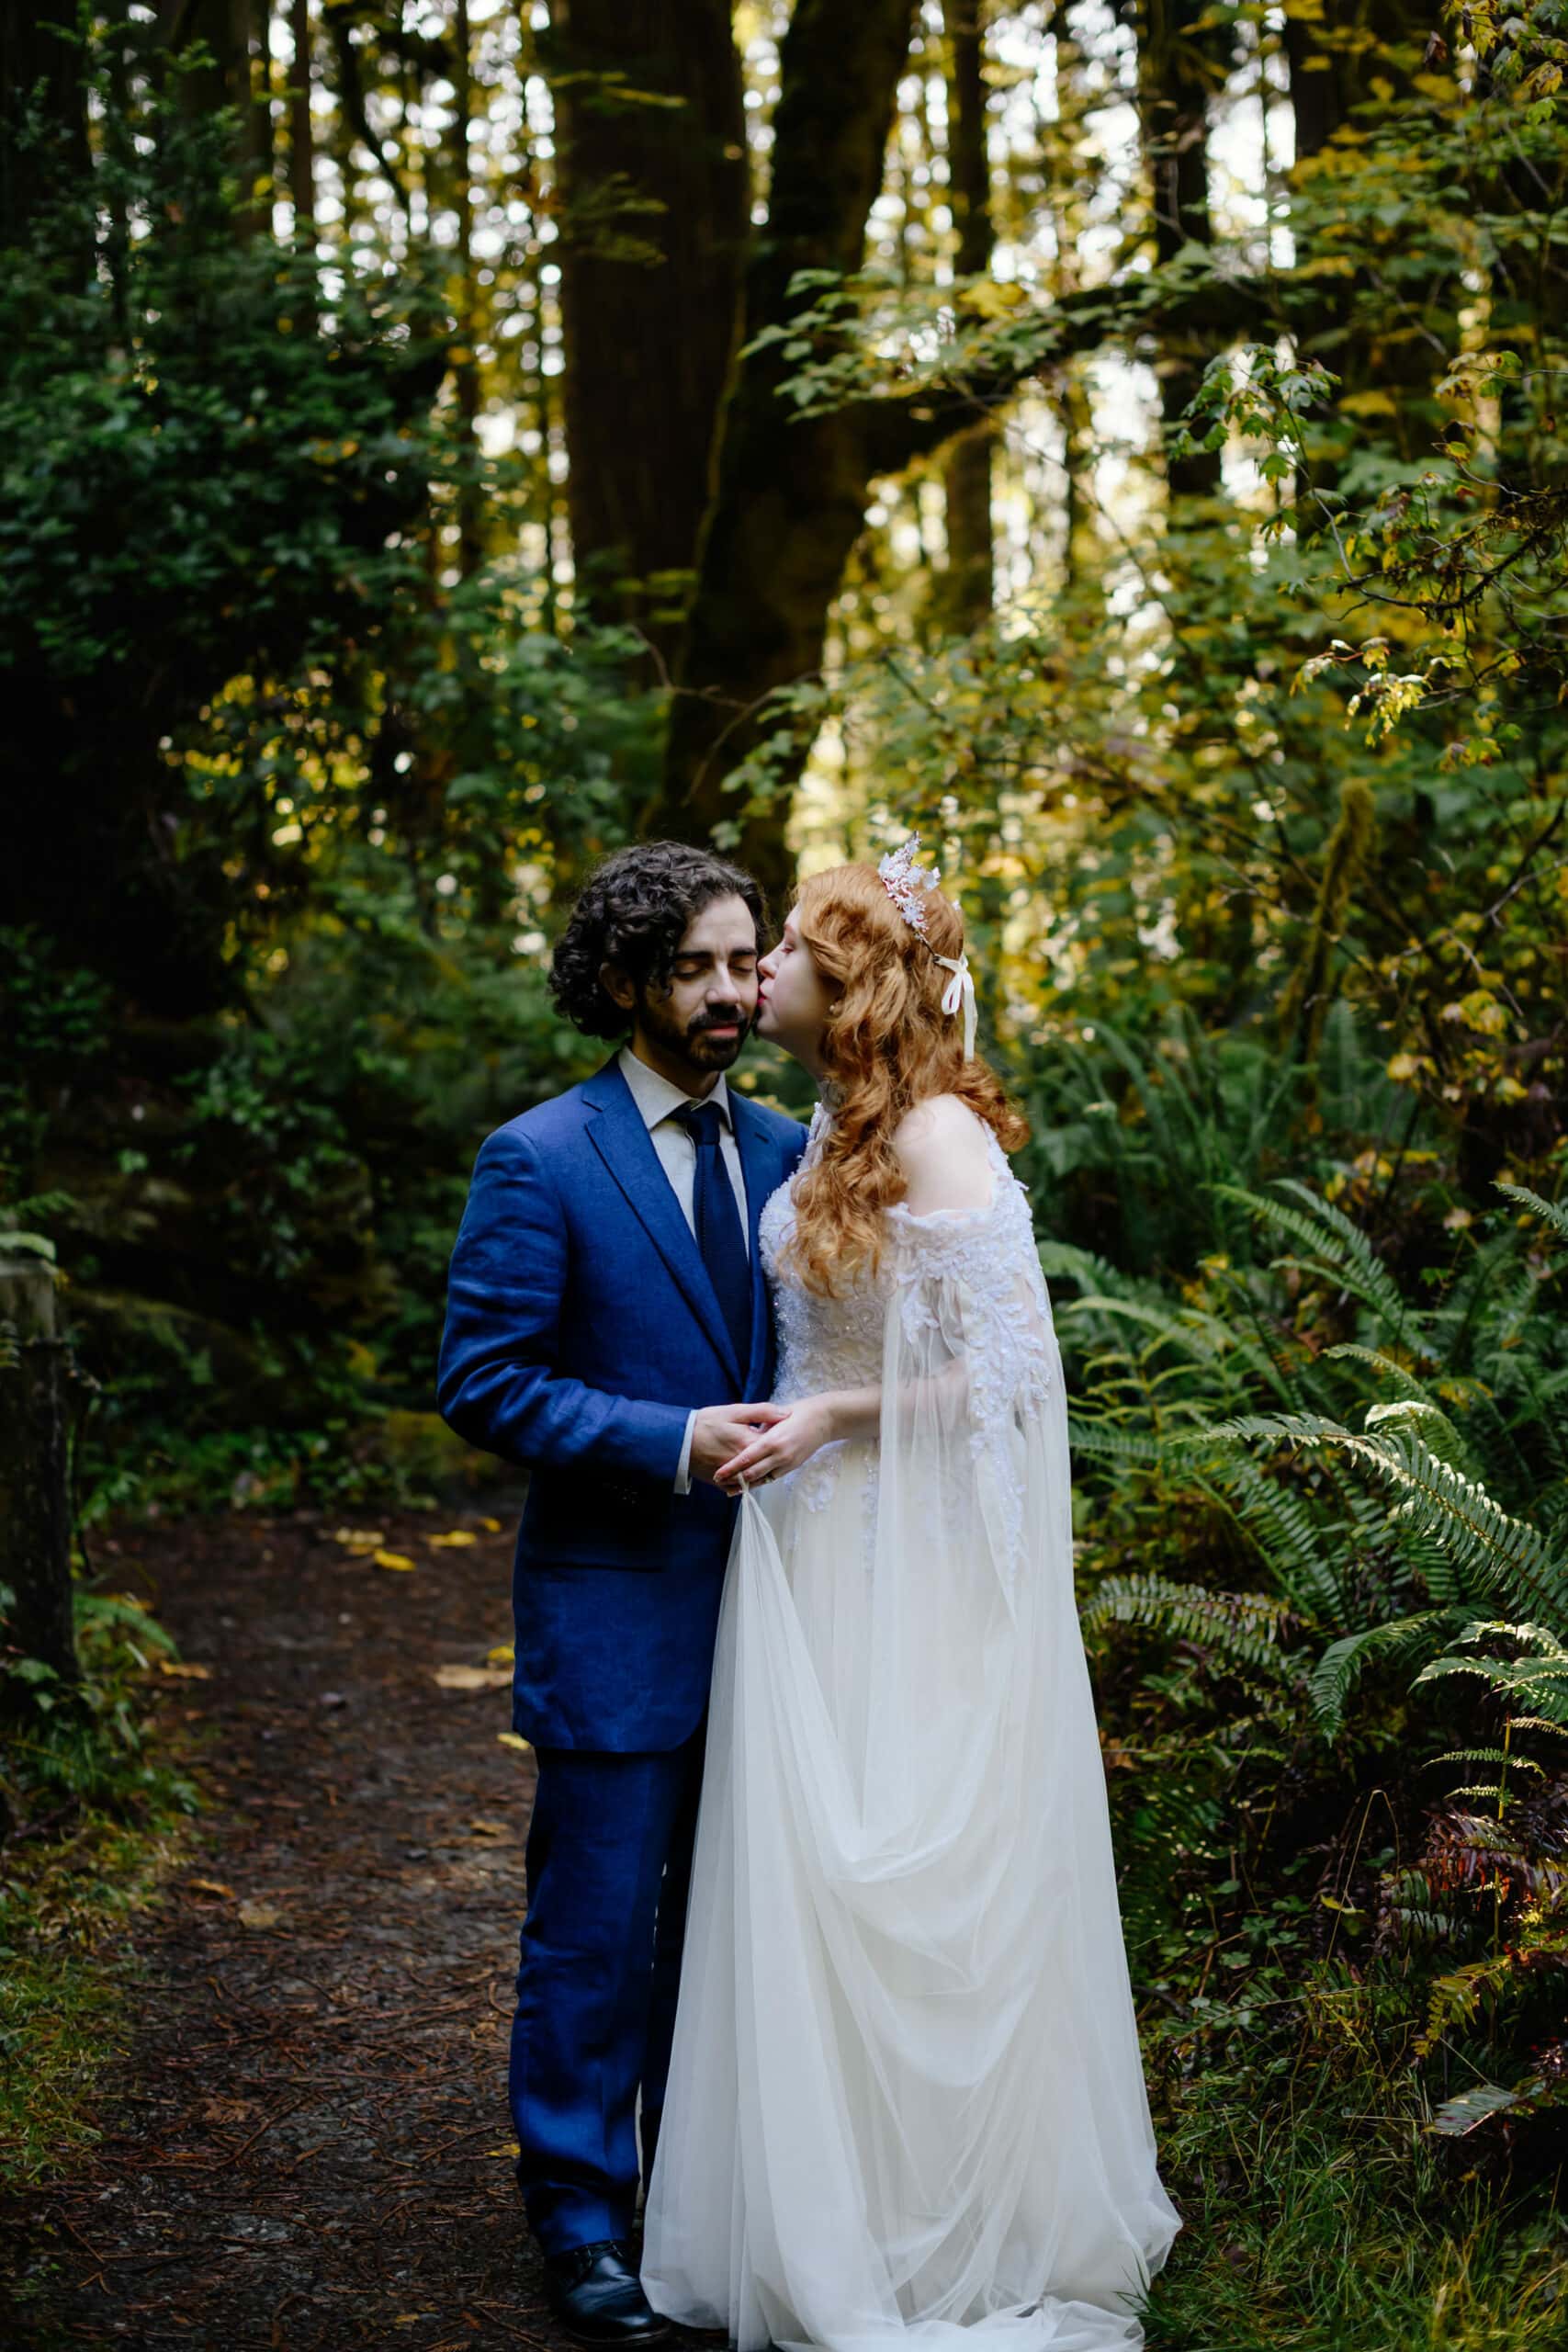 Newlywed portrait in Redwood National Park in Northern California with groom in royal blue linen suit and bride wearing vintage lace gown with sheer cape and a butterfly crown.